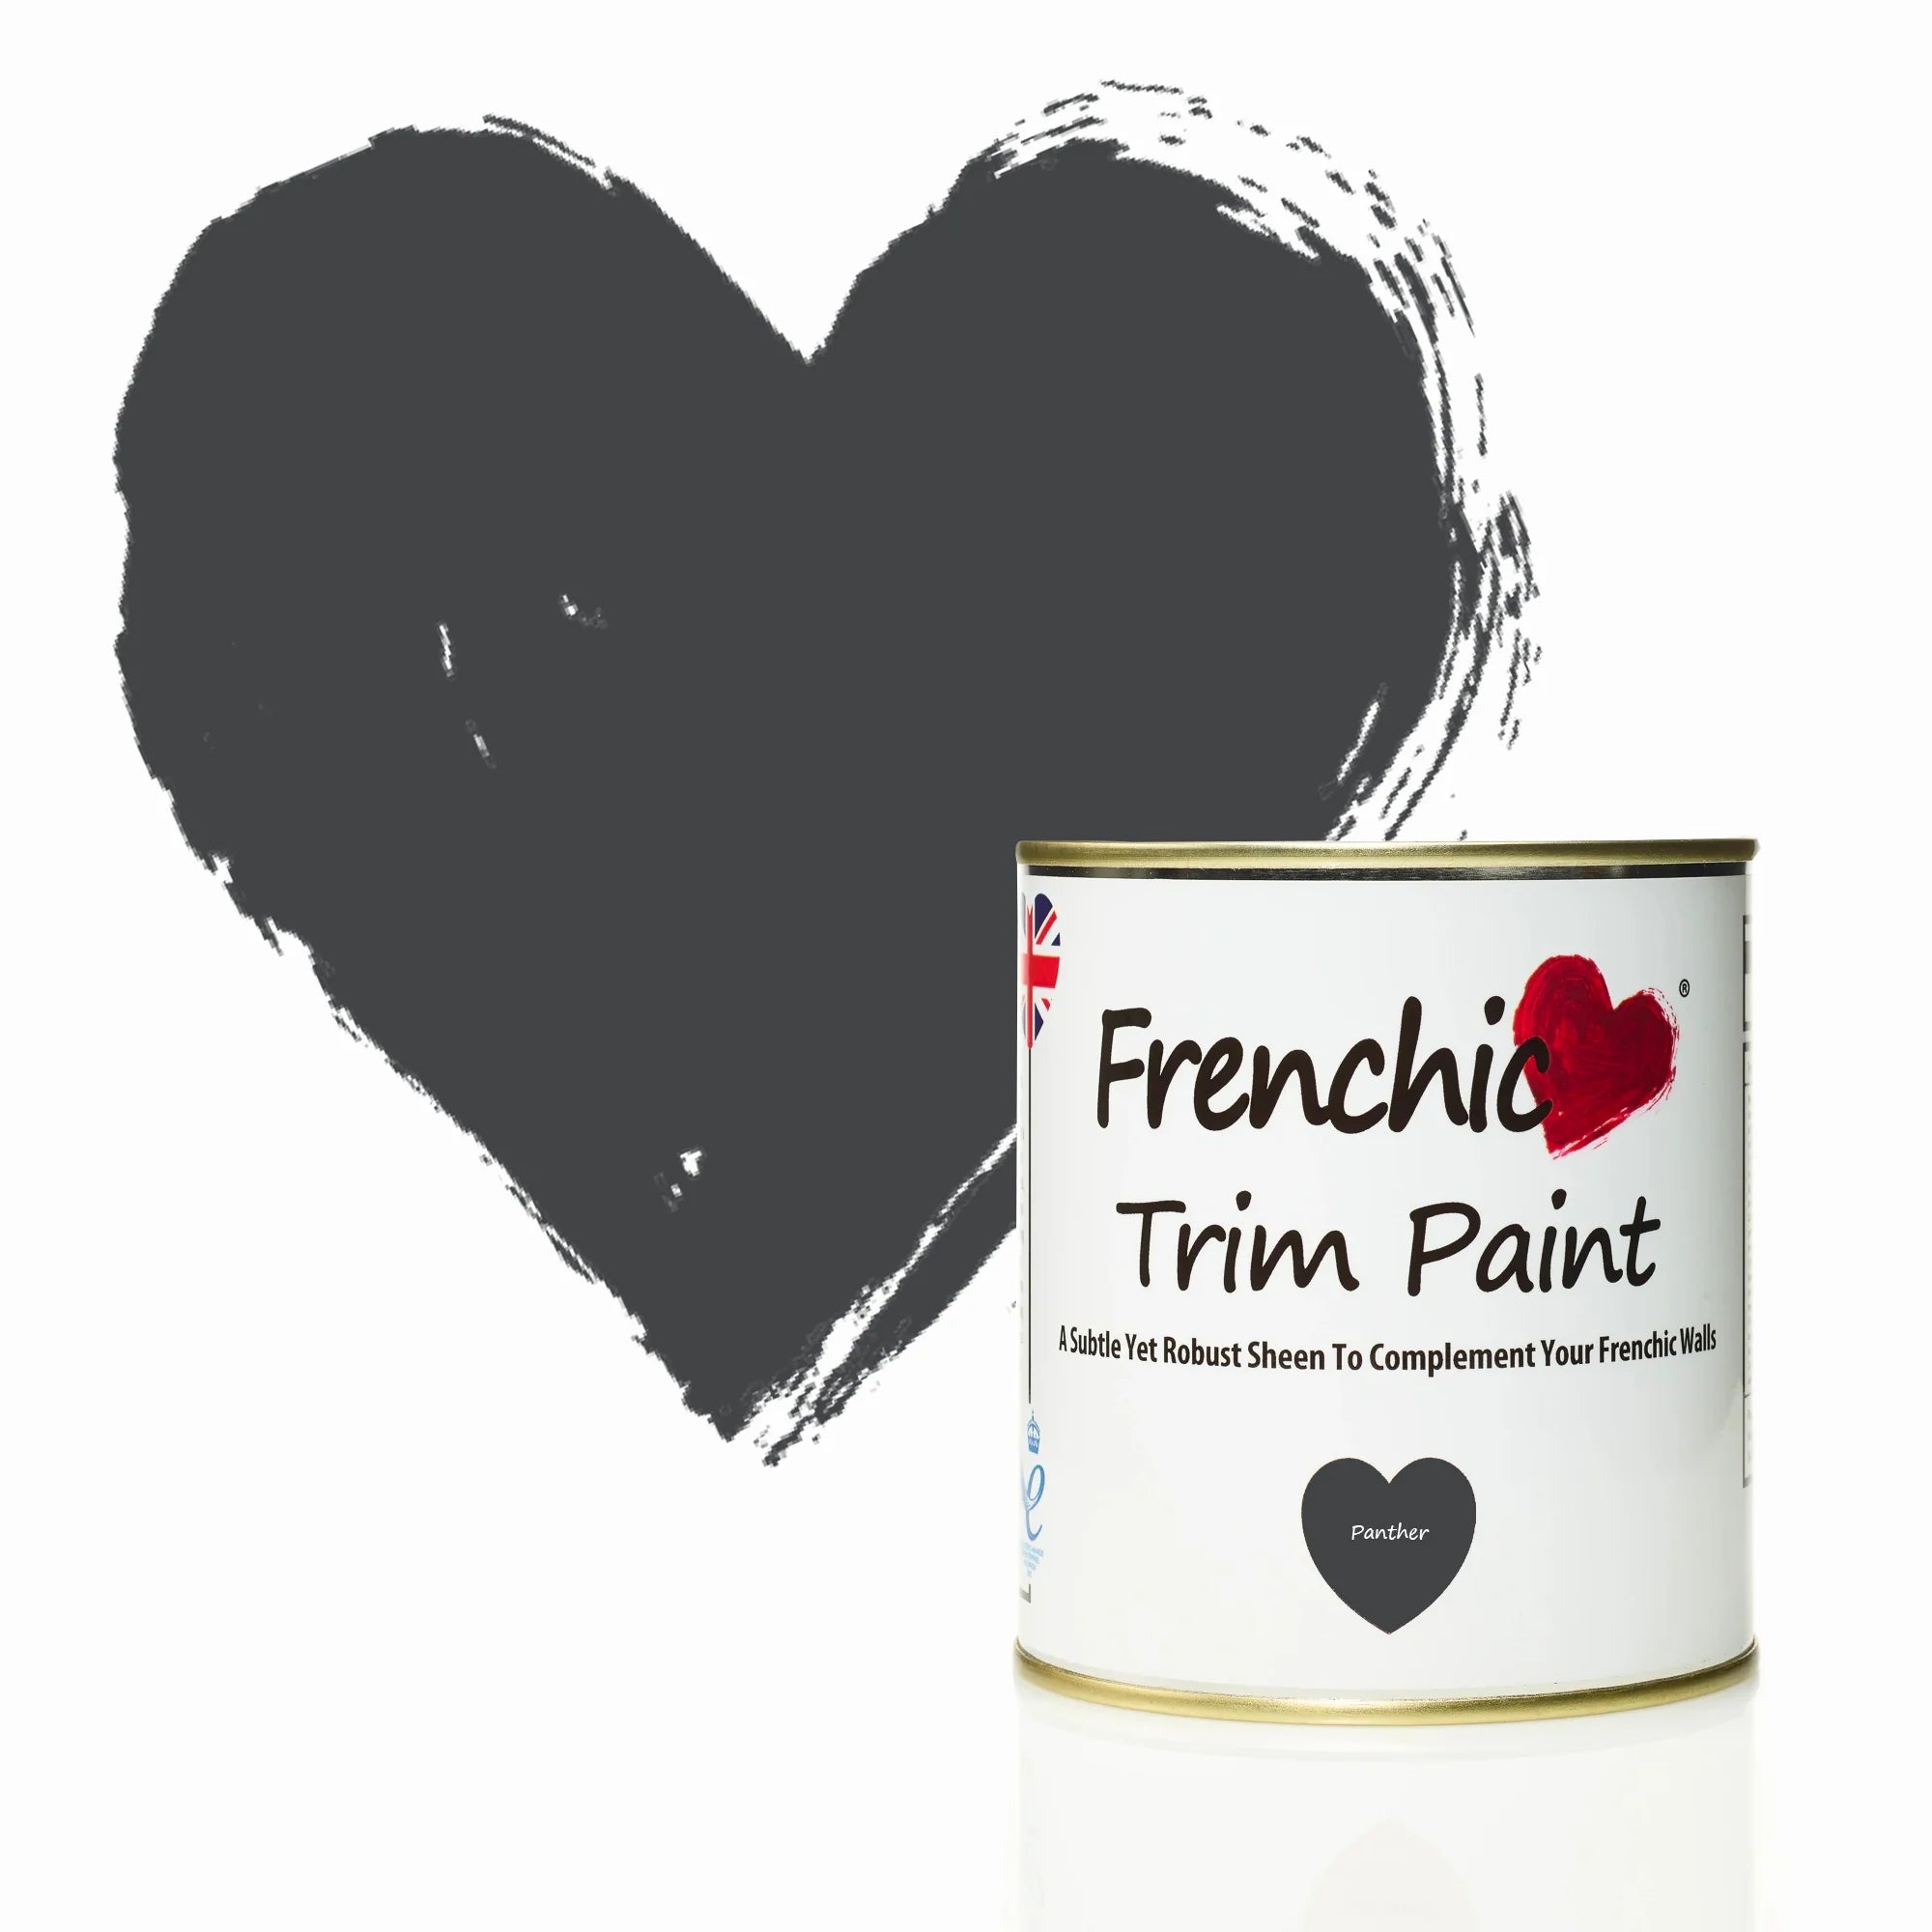 Frenchic Paint Panther Trim Paint Frenchic Paint Trim Paint Range by Weirs of Baggot Street Irelands Largest and most Trusted Stockist of Frenchic Paint. Shop online for Nationwide and Same Day Dublin Delivery